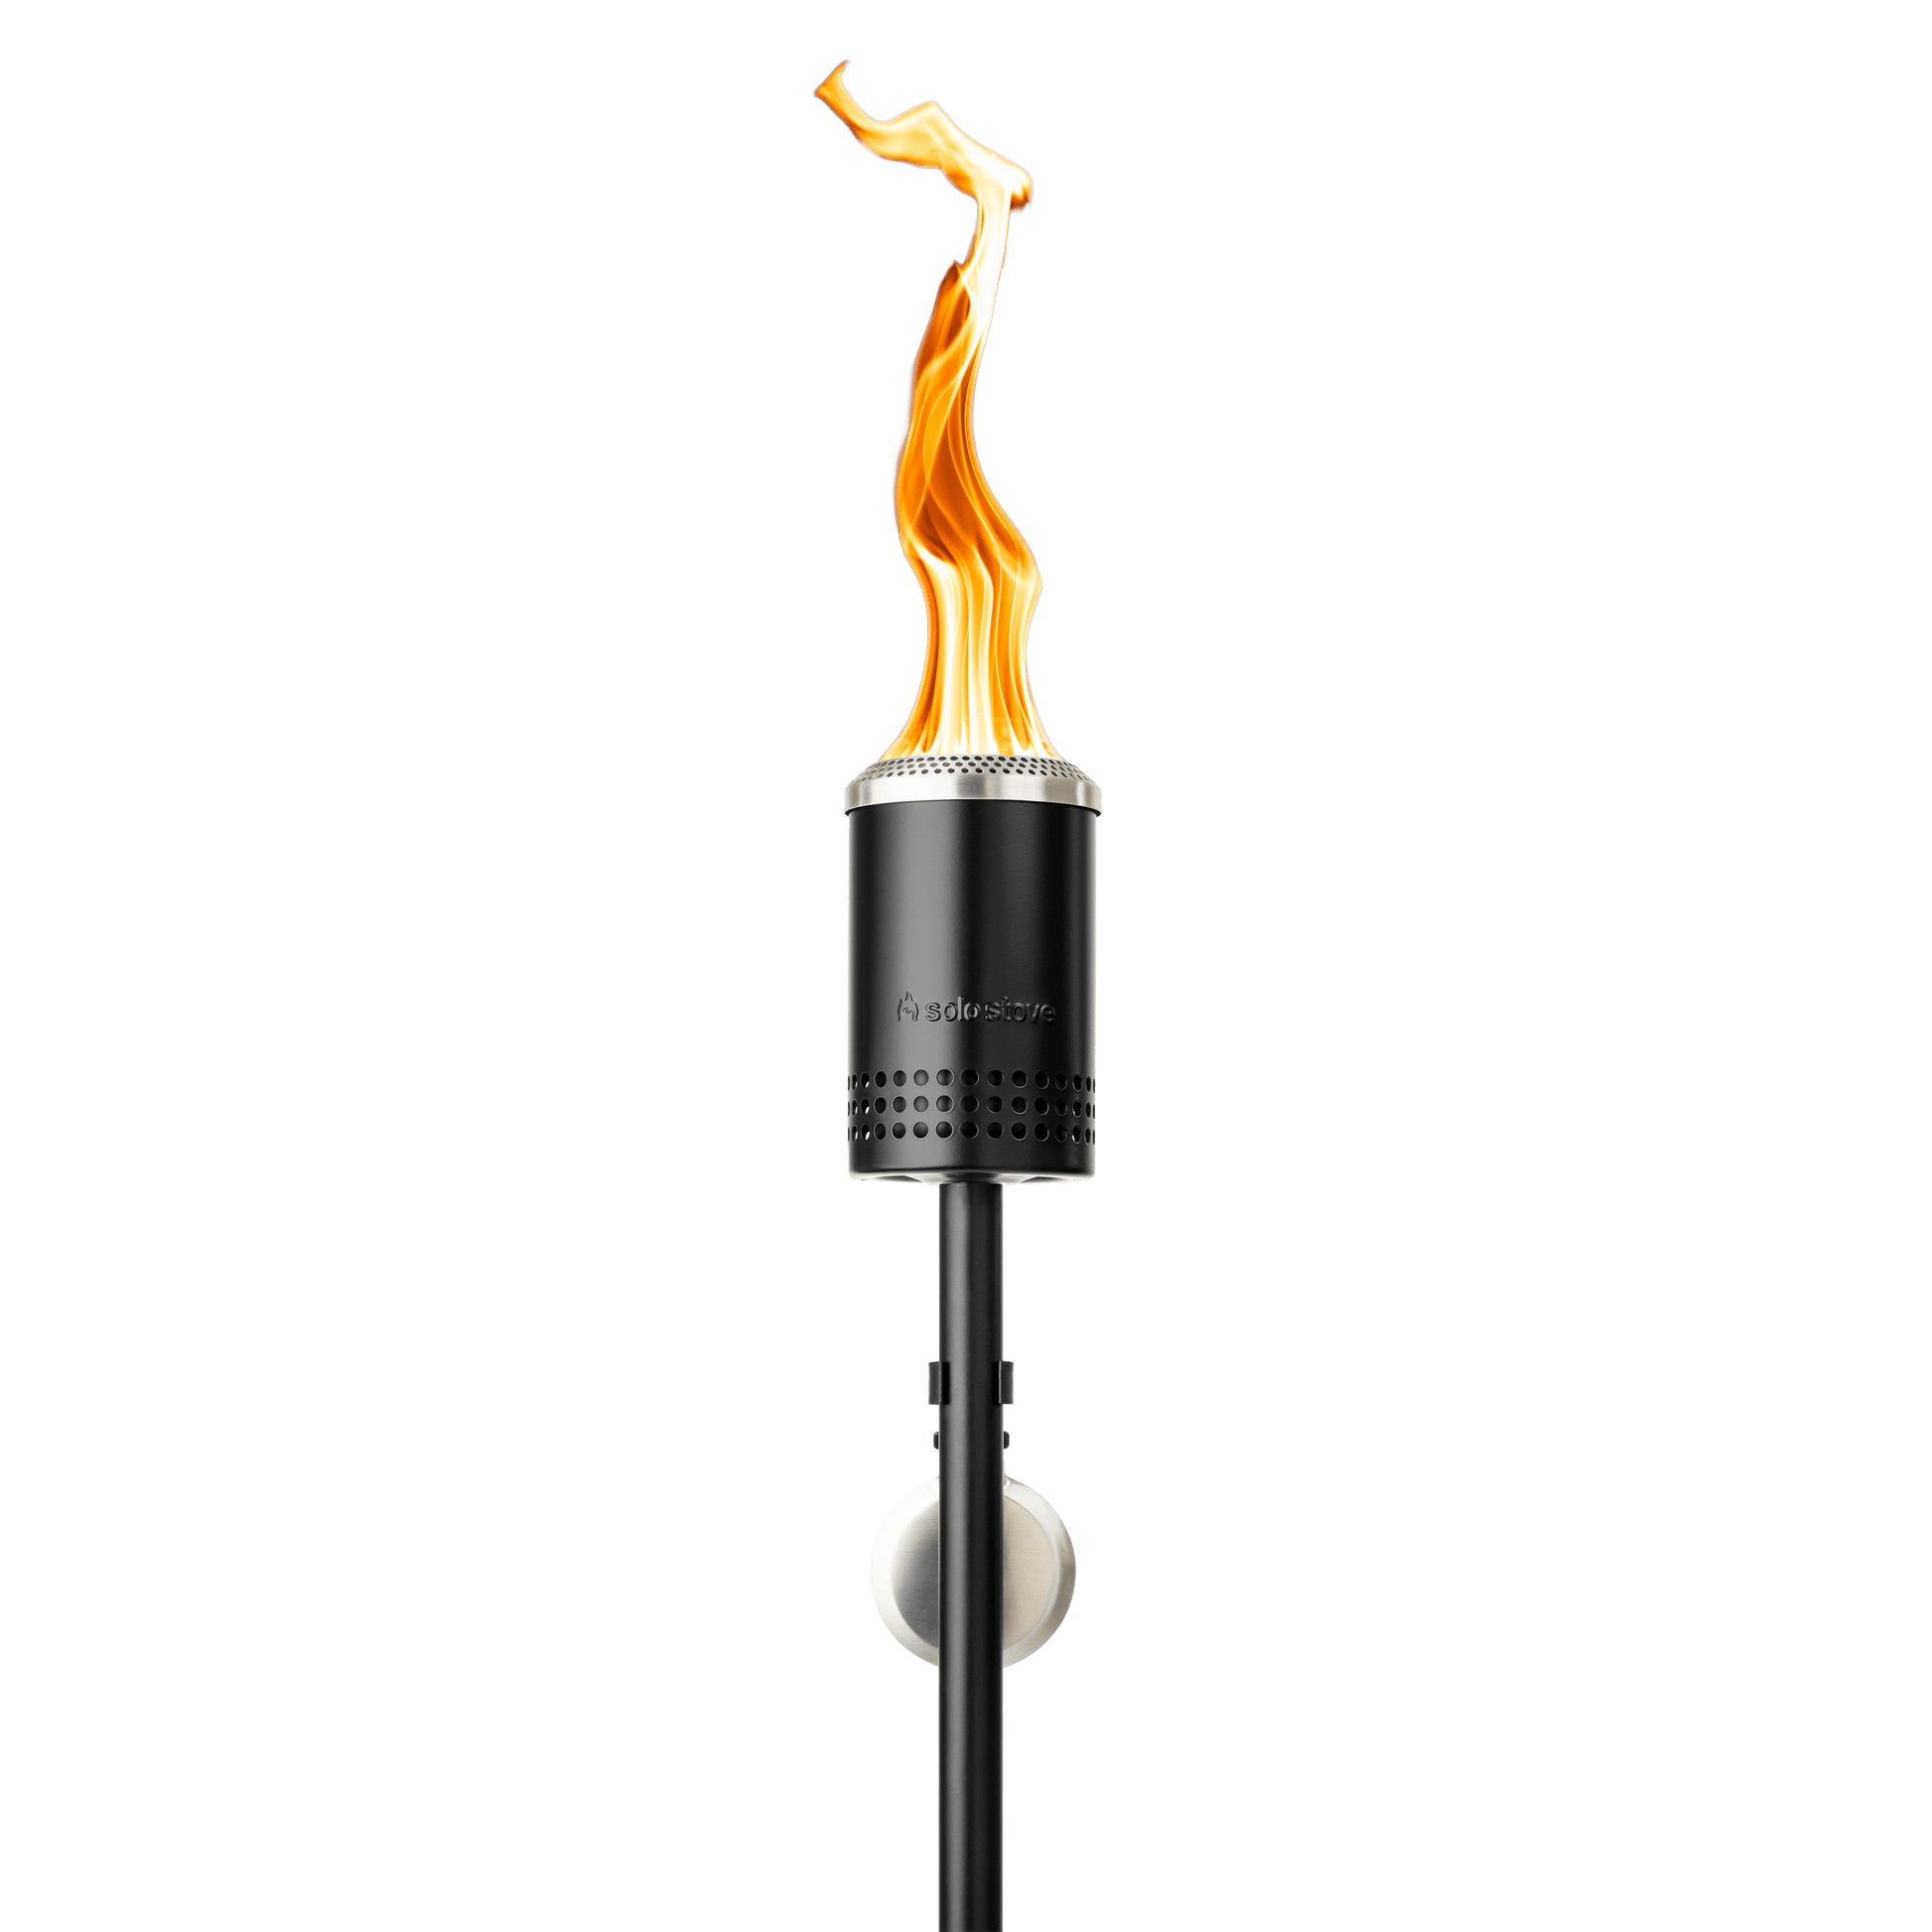 Solo Stove Mesa Torch | Backyard Torch for Outside, 5 Hour Burn Time, Cold-Rolled Steel, Incl. Ground Stake, Fuel Funnel, and 3 Wicks, Adjustable Height: 37.75-52.5 in, Fuel Capacity: 21 fl oz - TRAPSKI, LLC